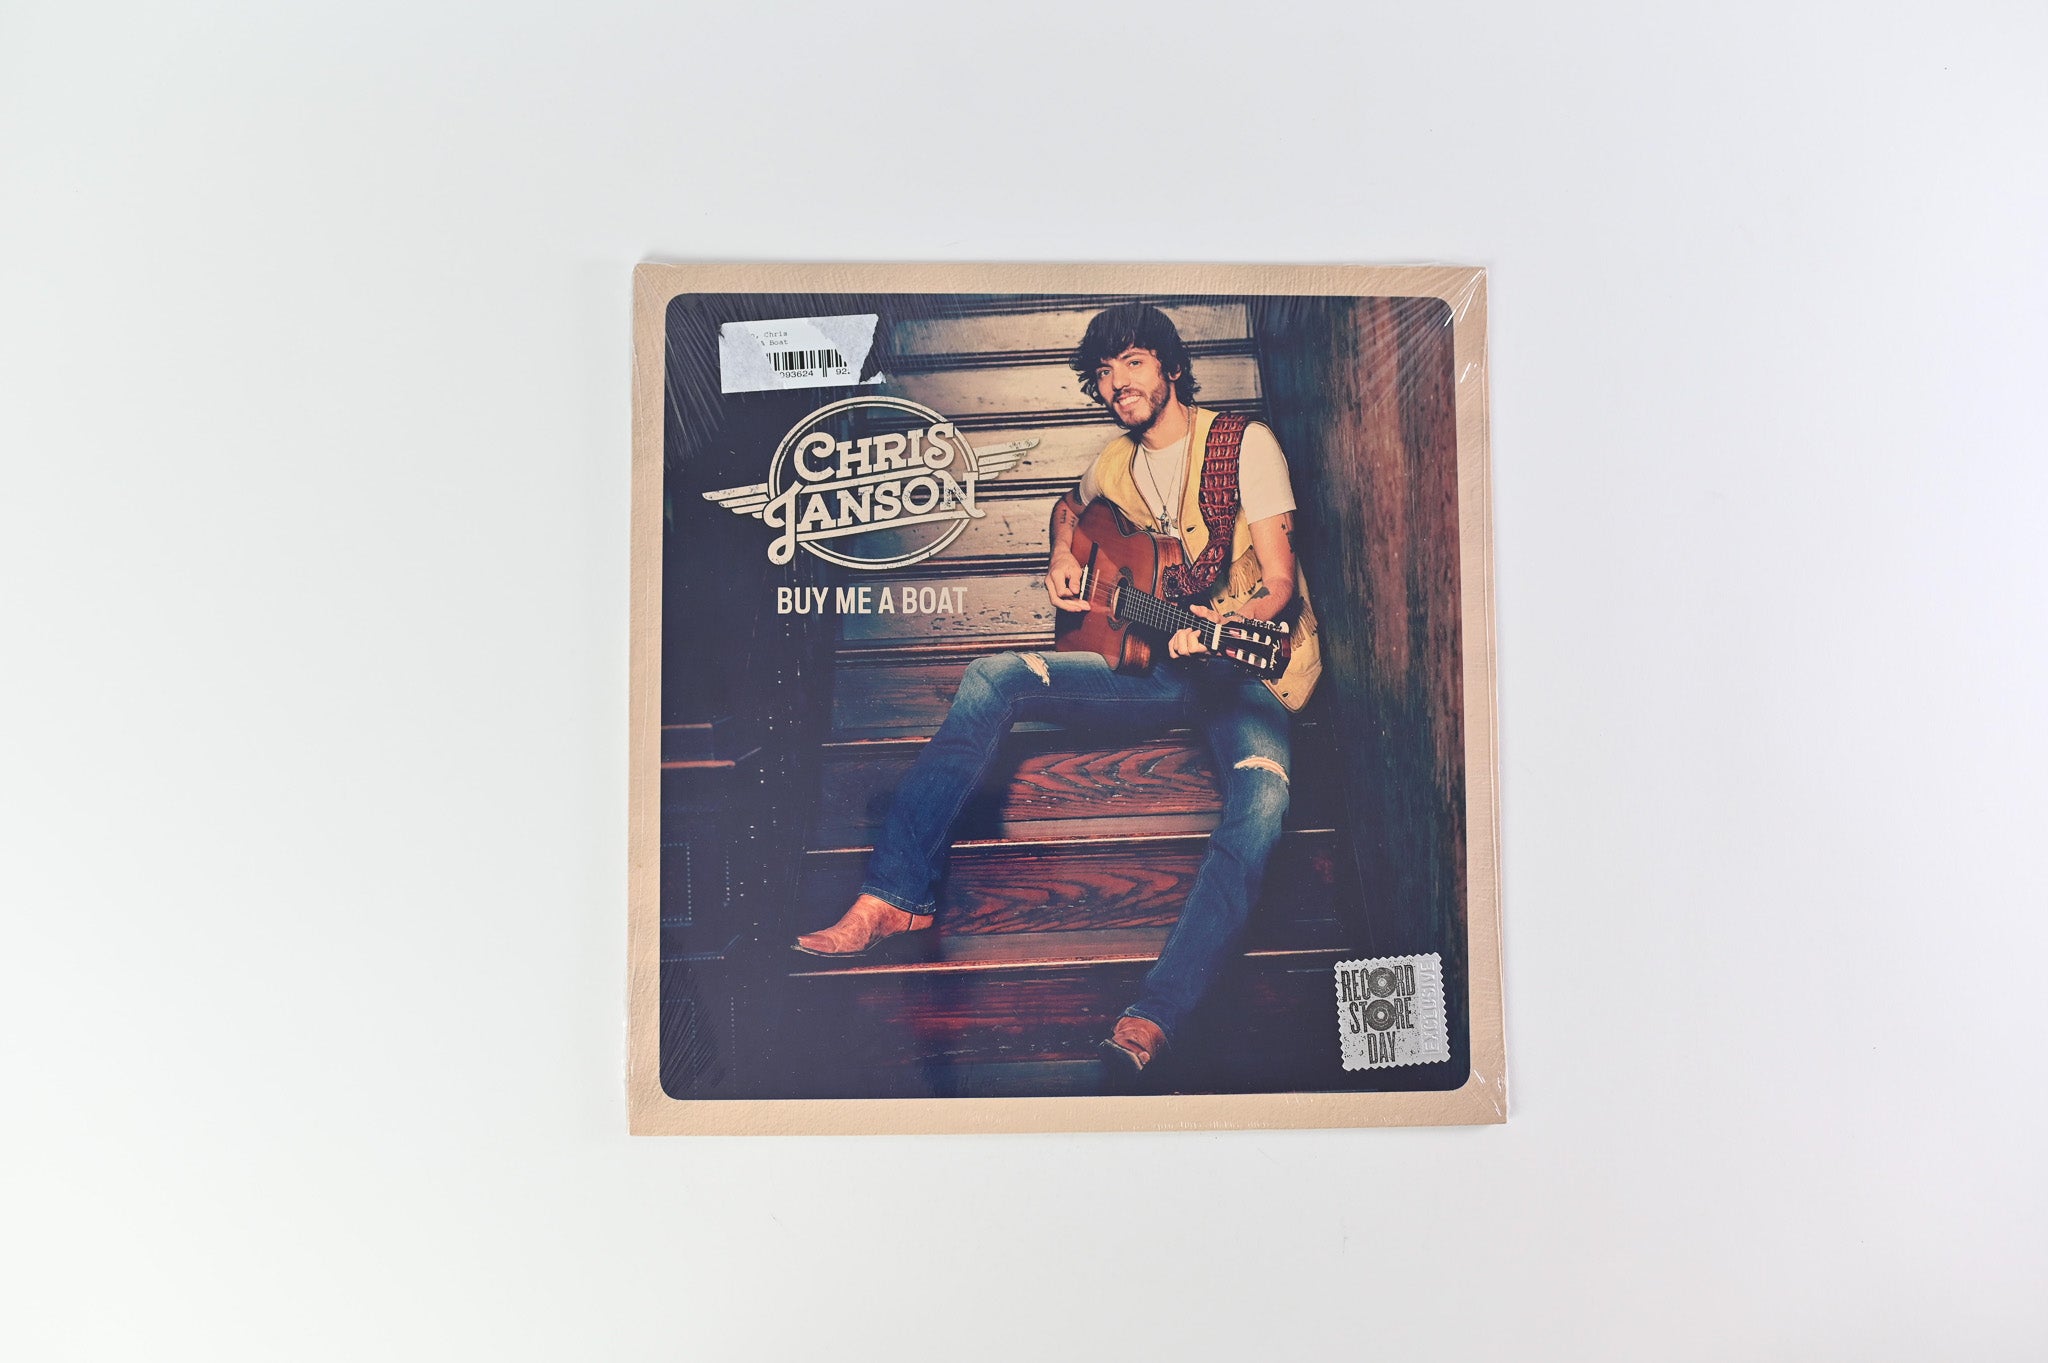 Chris Janson - Buy Me A Boat on Warner Bros. Records - RSD Sealed